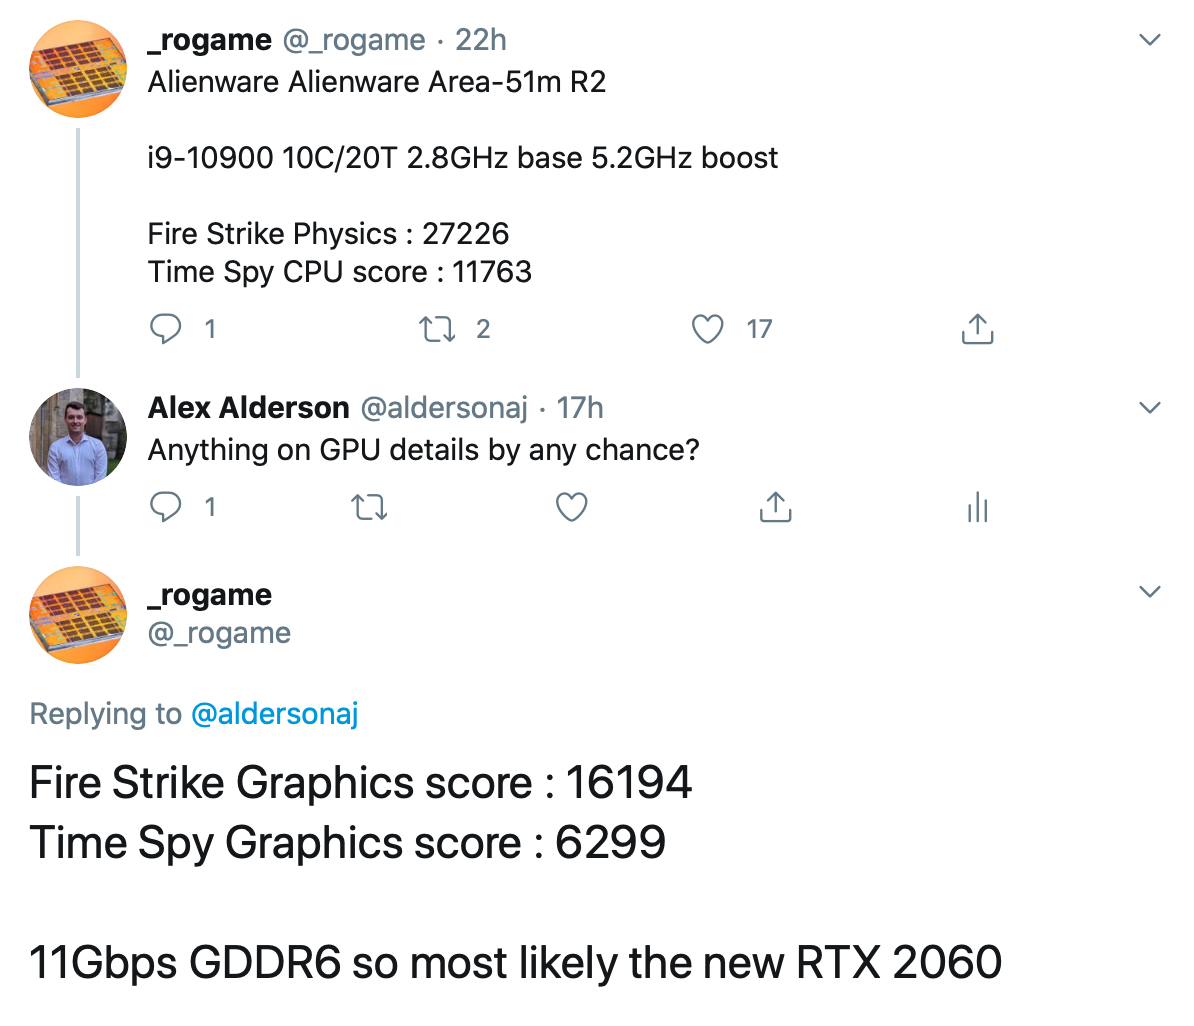 3DMark confirms up to Intel Core i9-10900K, an NVIDIA GeForce RTX